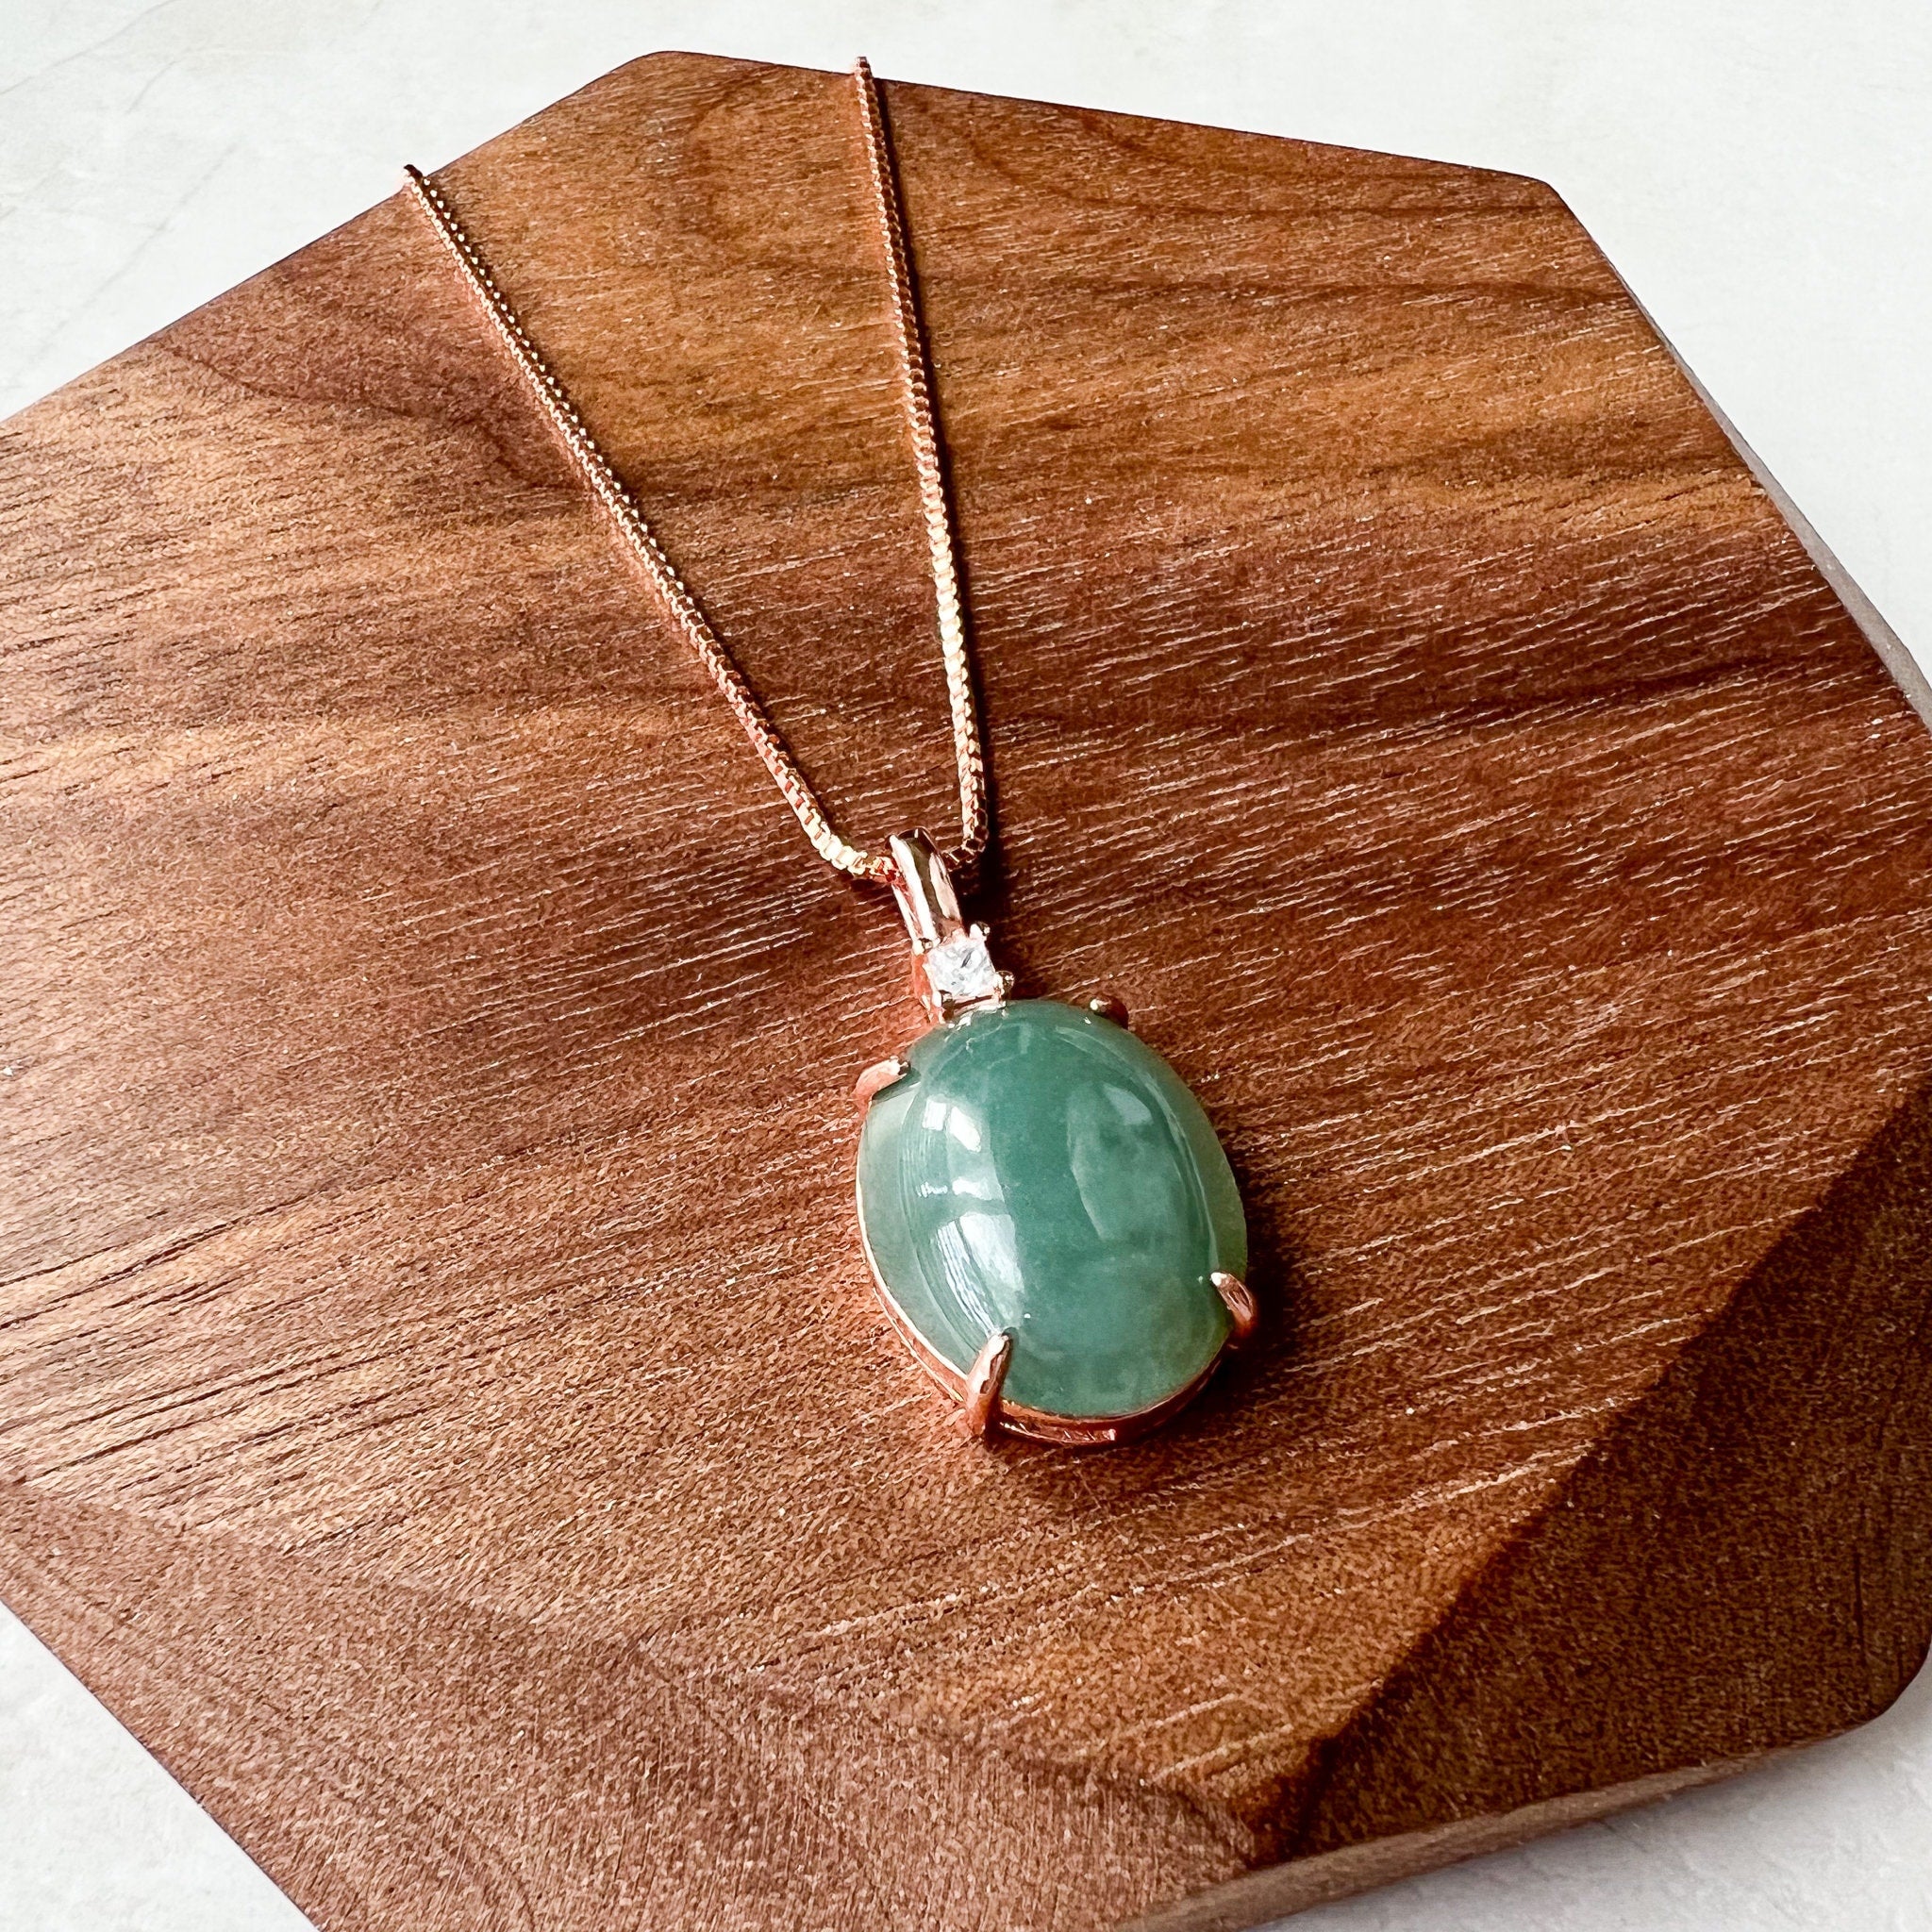 Jade stone necklace – Souvenir Gifts